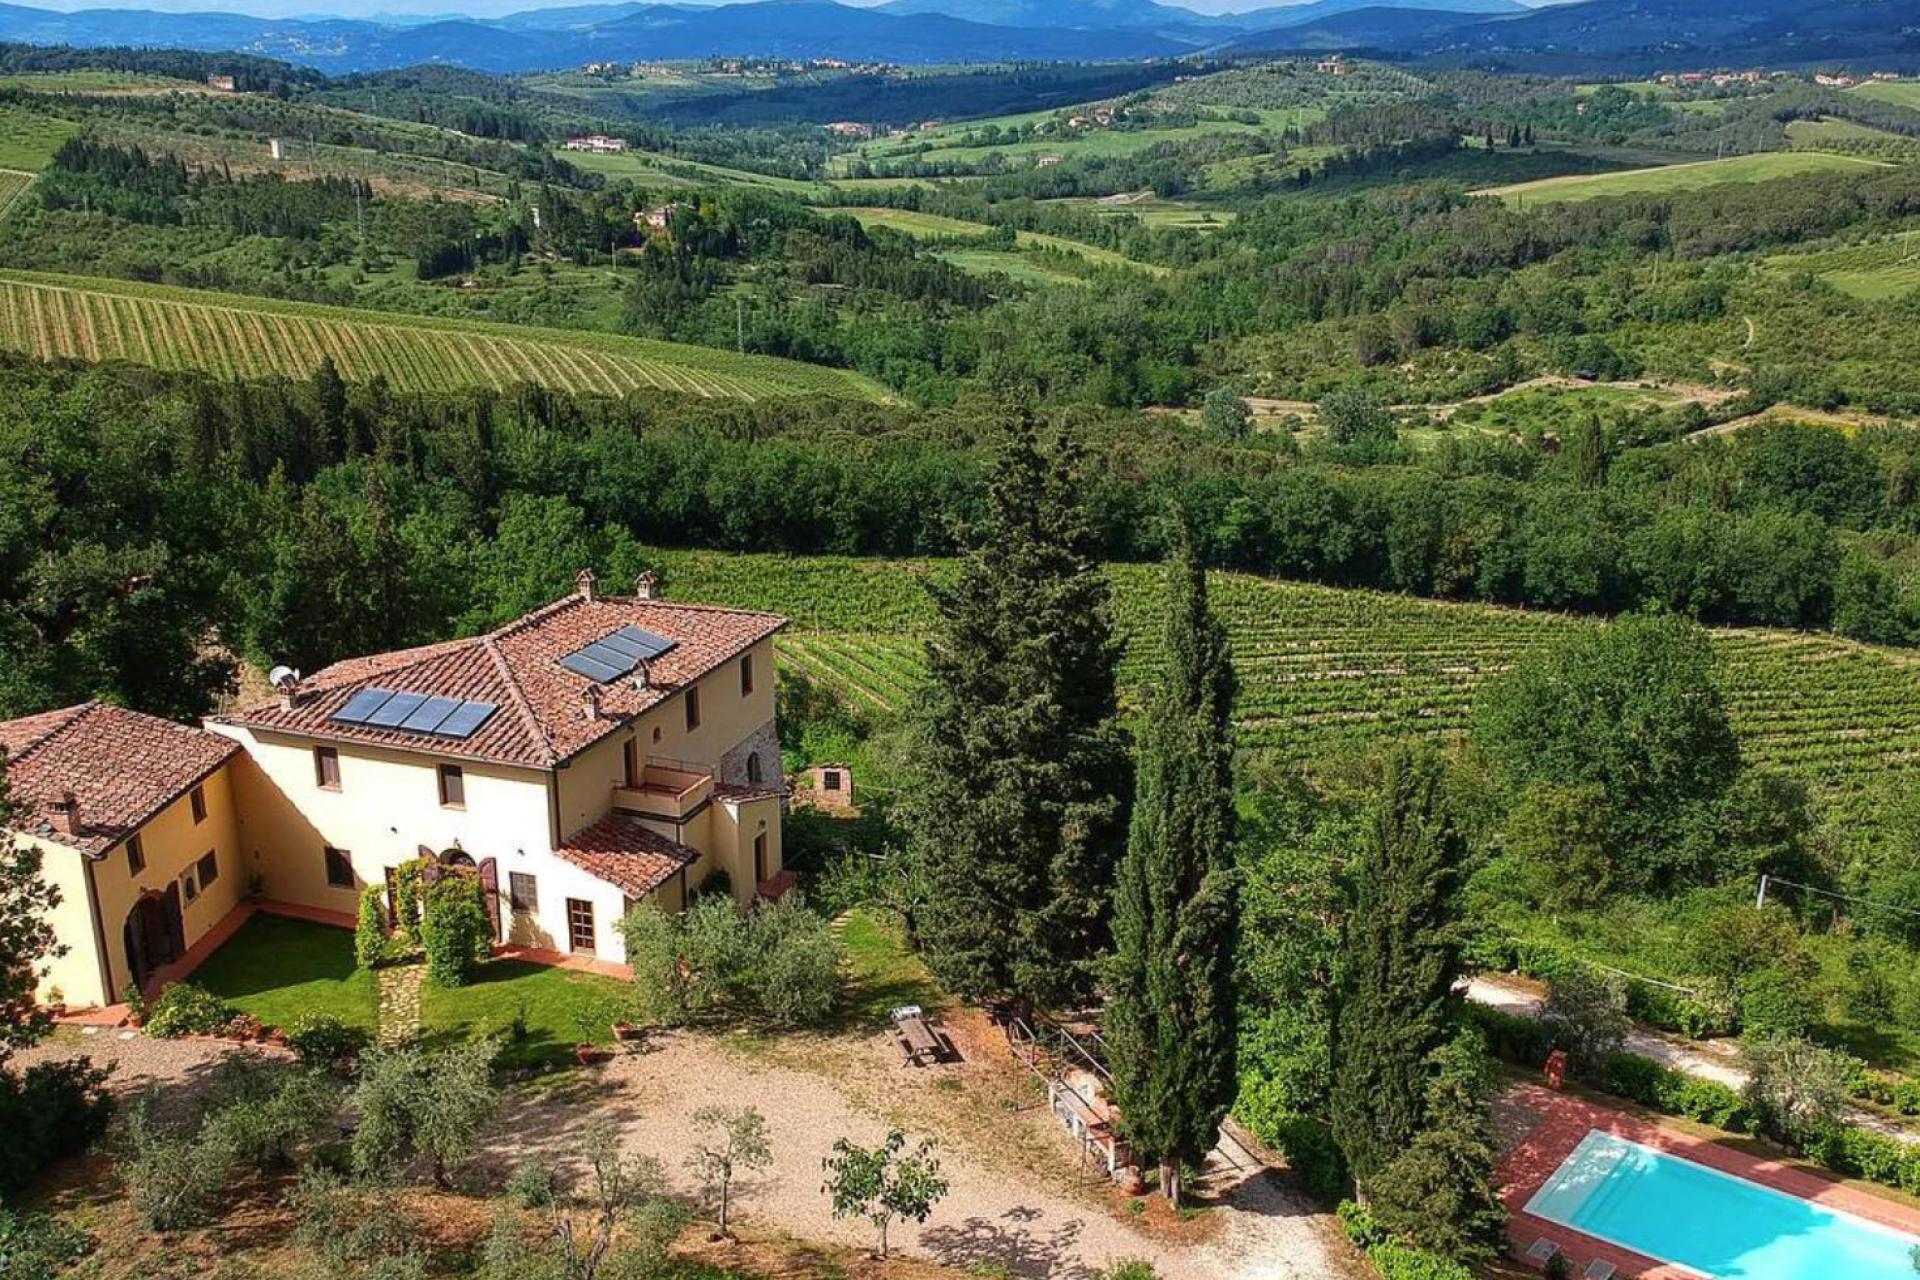 Agriturismo Tuscany Cozy agriturismo in the Chianti region near Florence